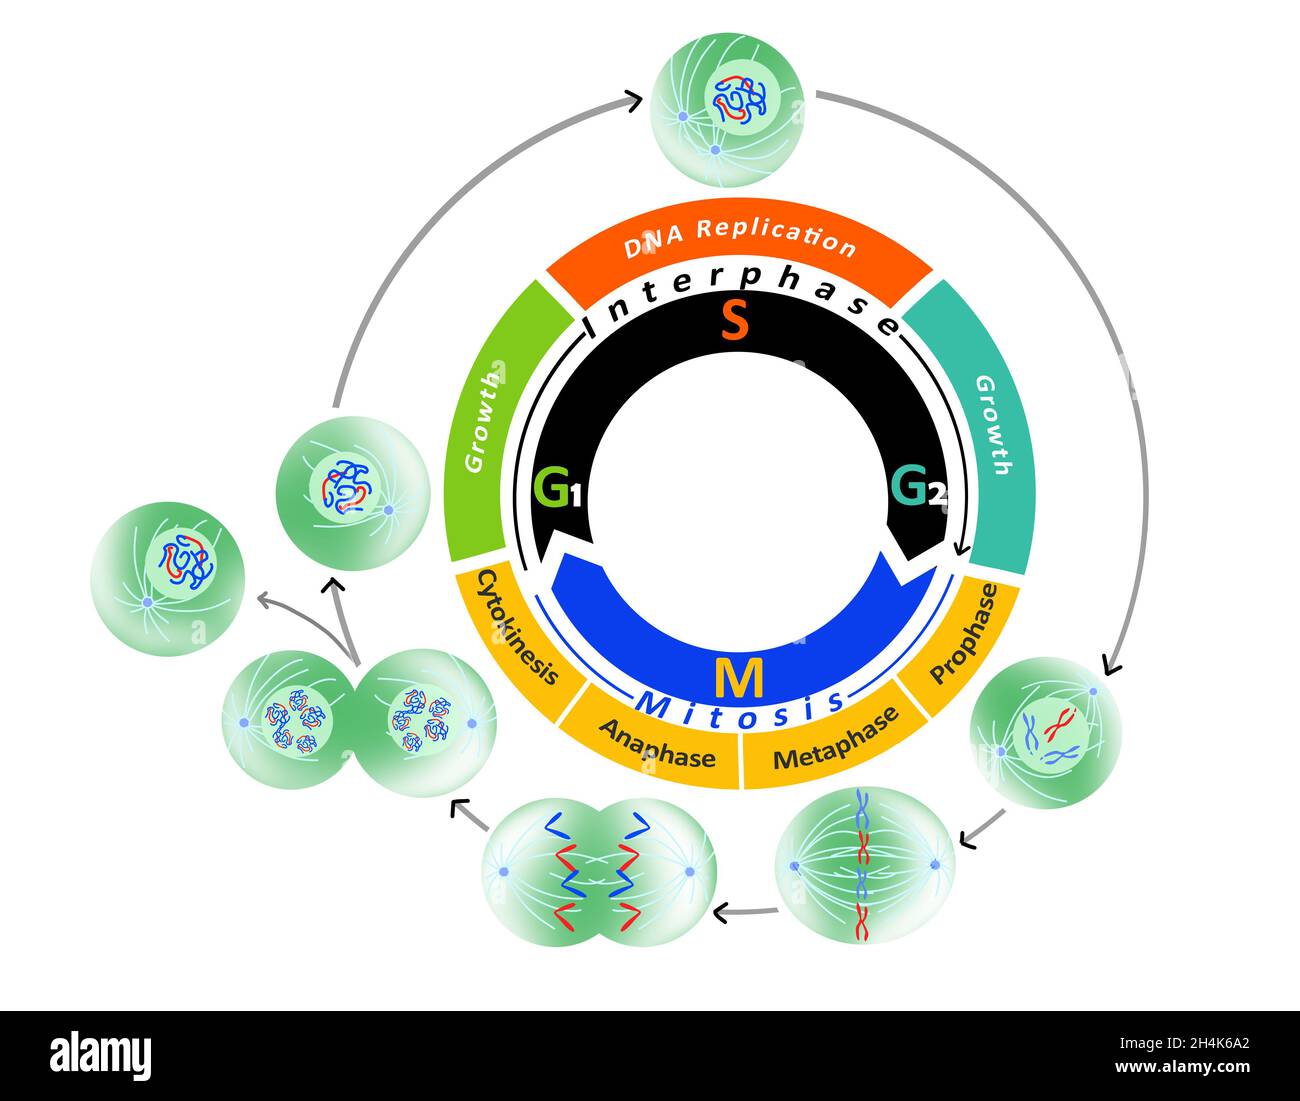 Cell cycle diagram, Phases of the cell cycle and mitosis. (DNA replication). Education illustration on white background. Stock Photo